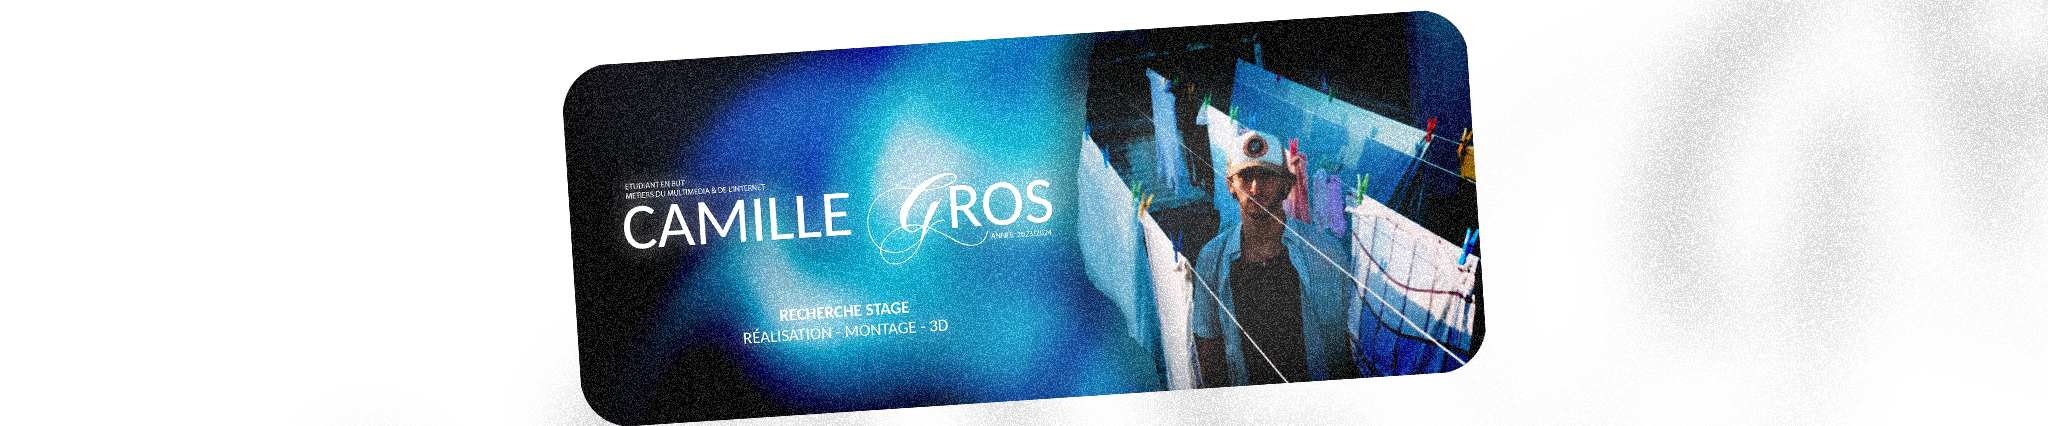 Camille GROS's profile banner